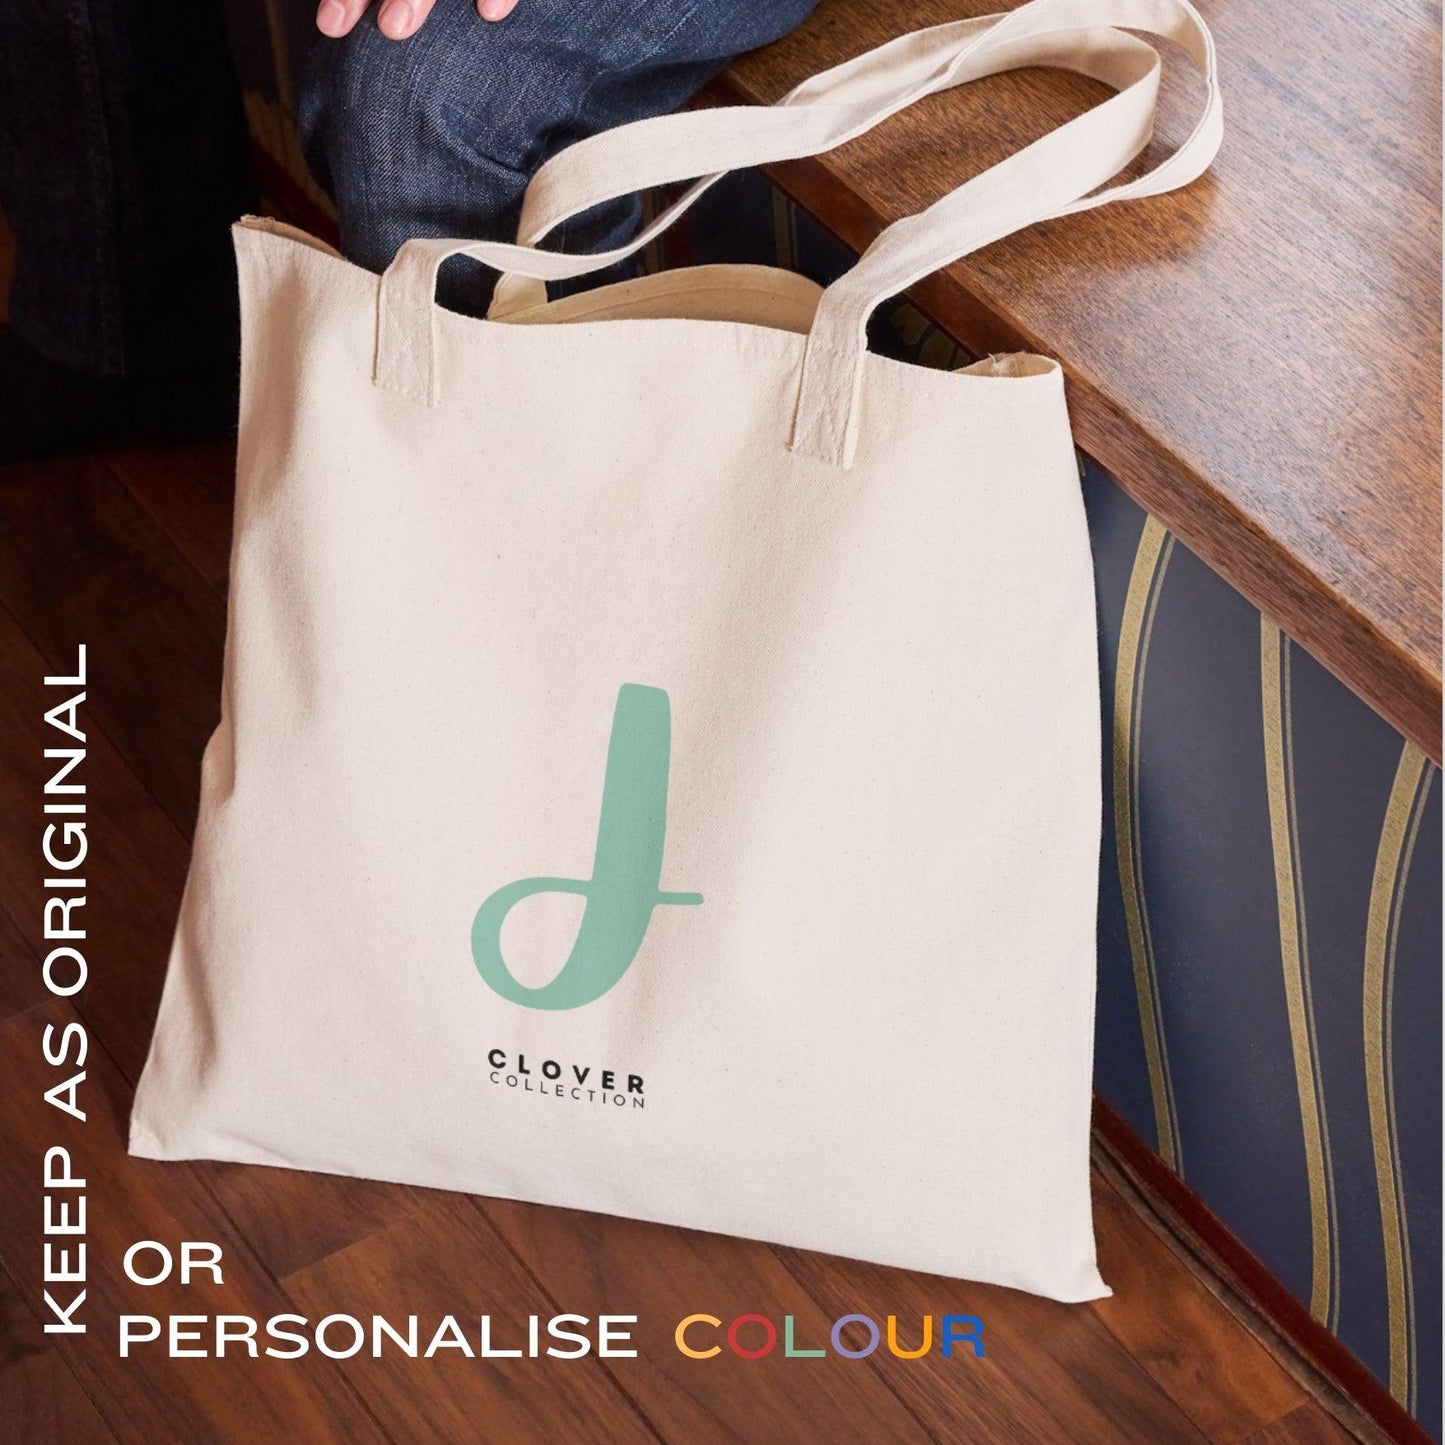 Initial “J” Eco Tote Bag - Clover Collection Shop